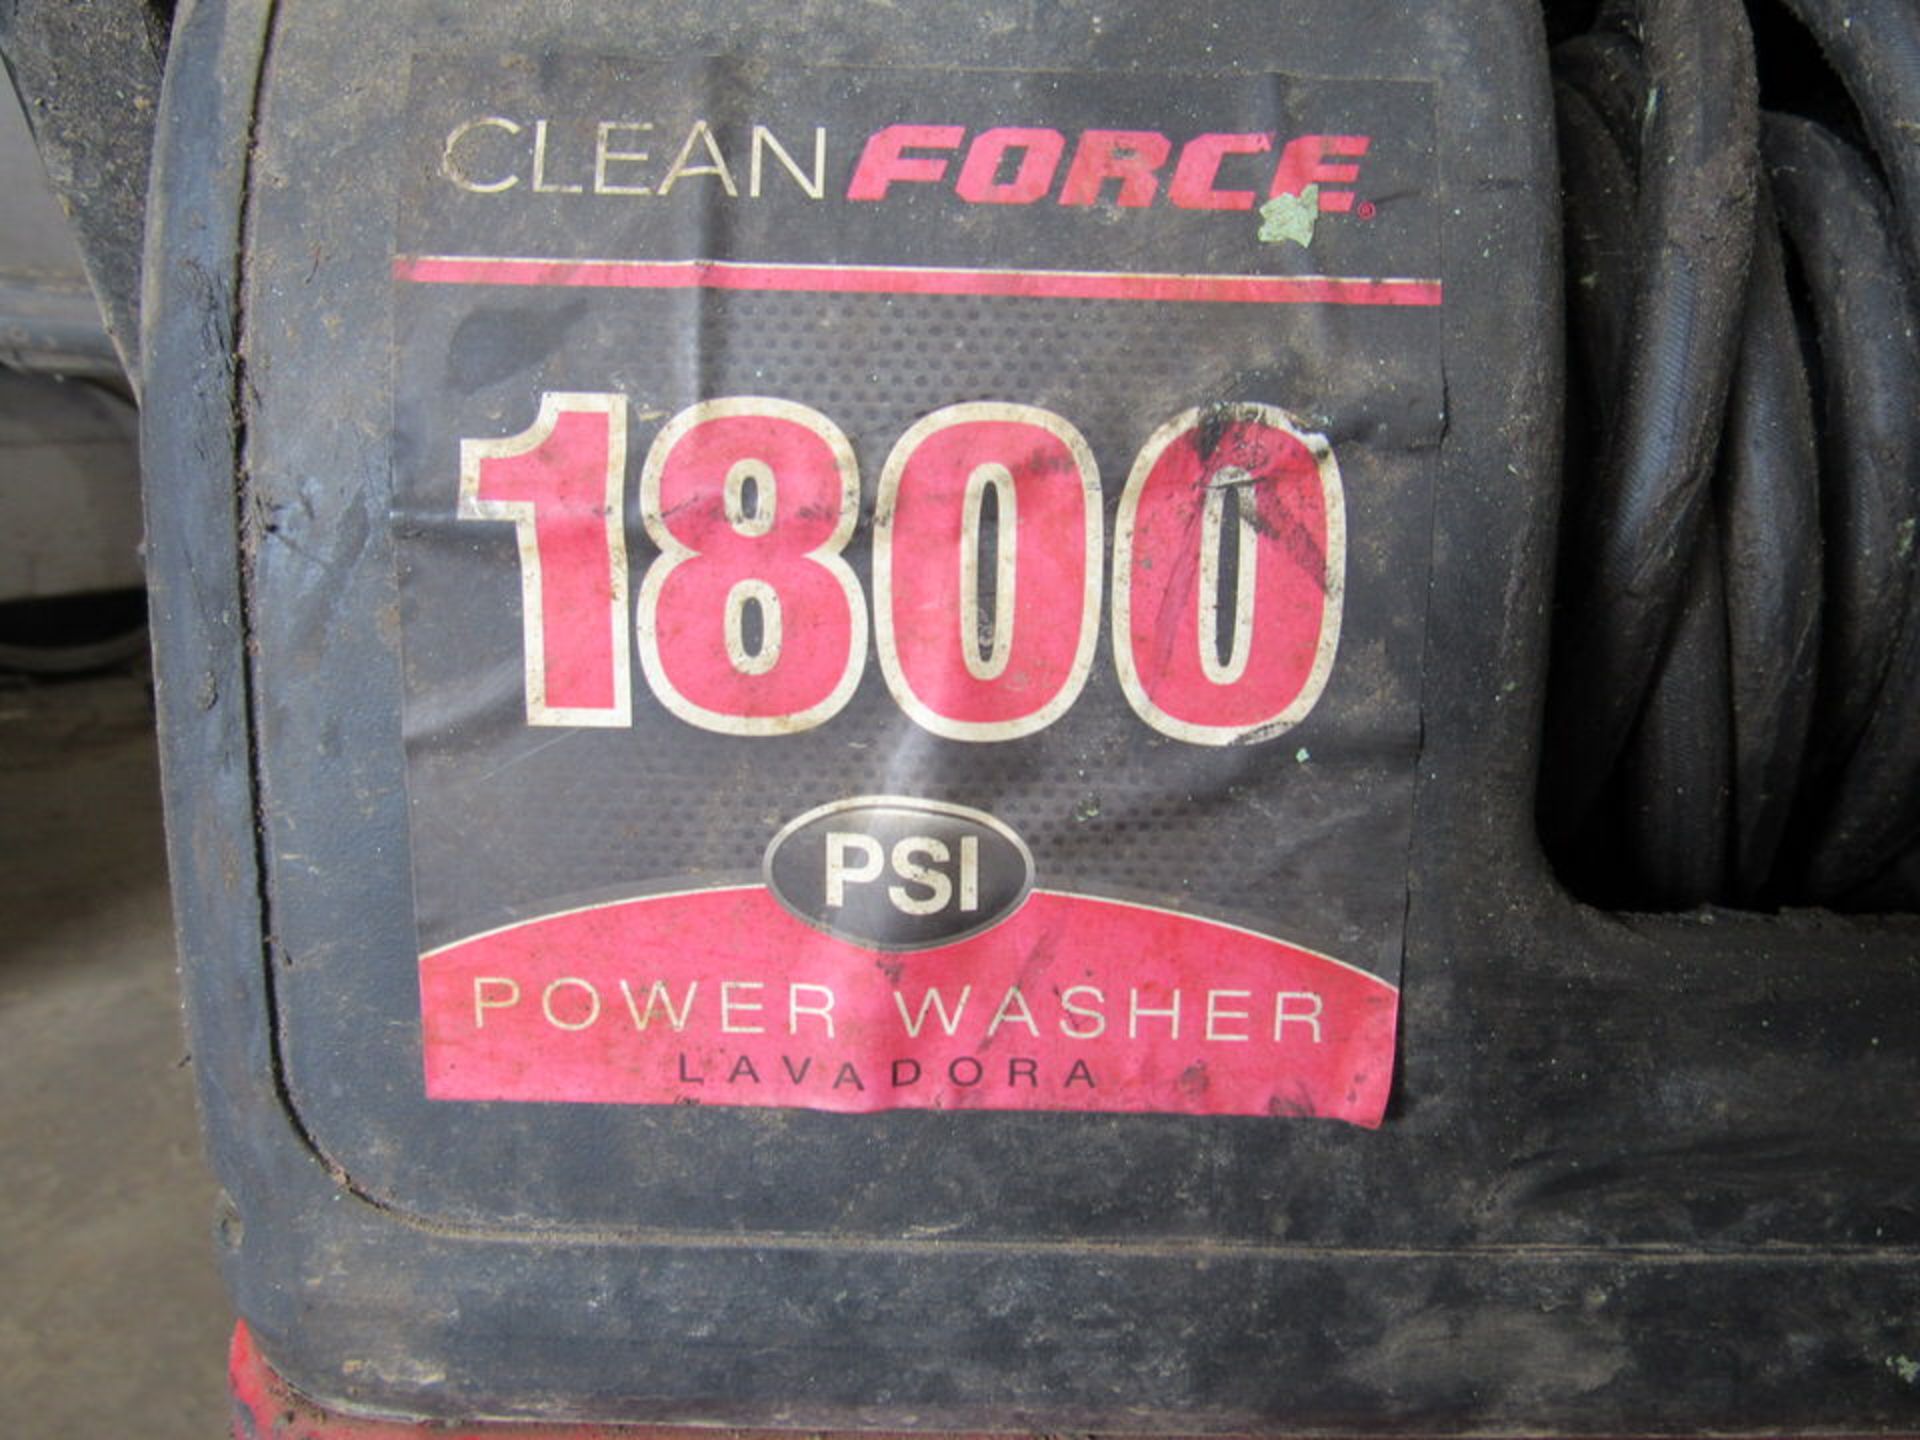 Clean Force 1800 Power Washer (LOCATION: 4214 Bluebonnet Drive, Houston, TX 77053) - Image 4 of 6